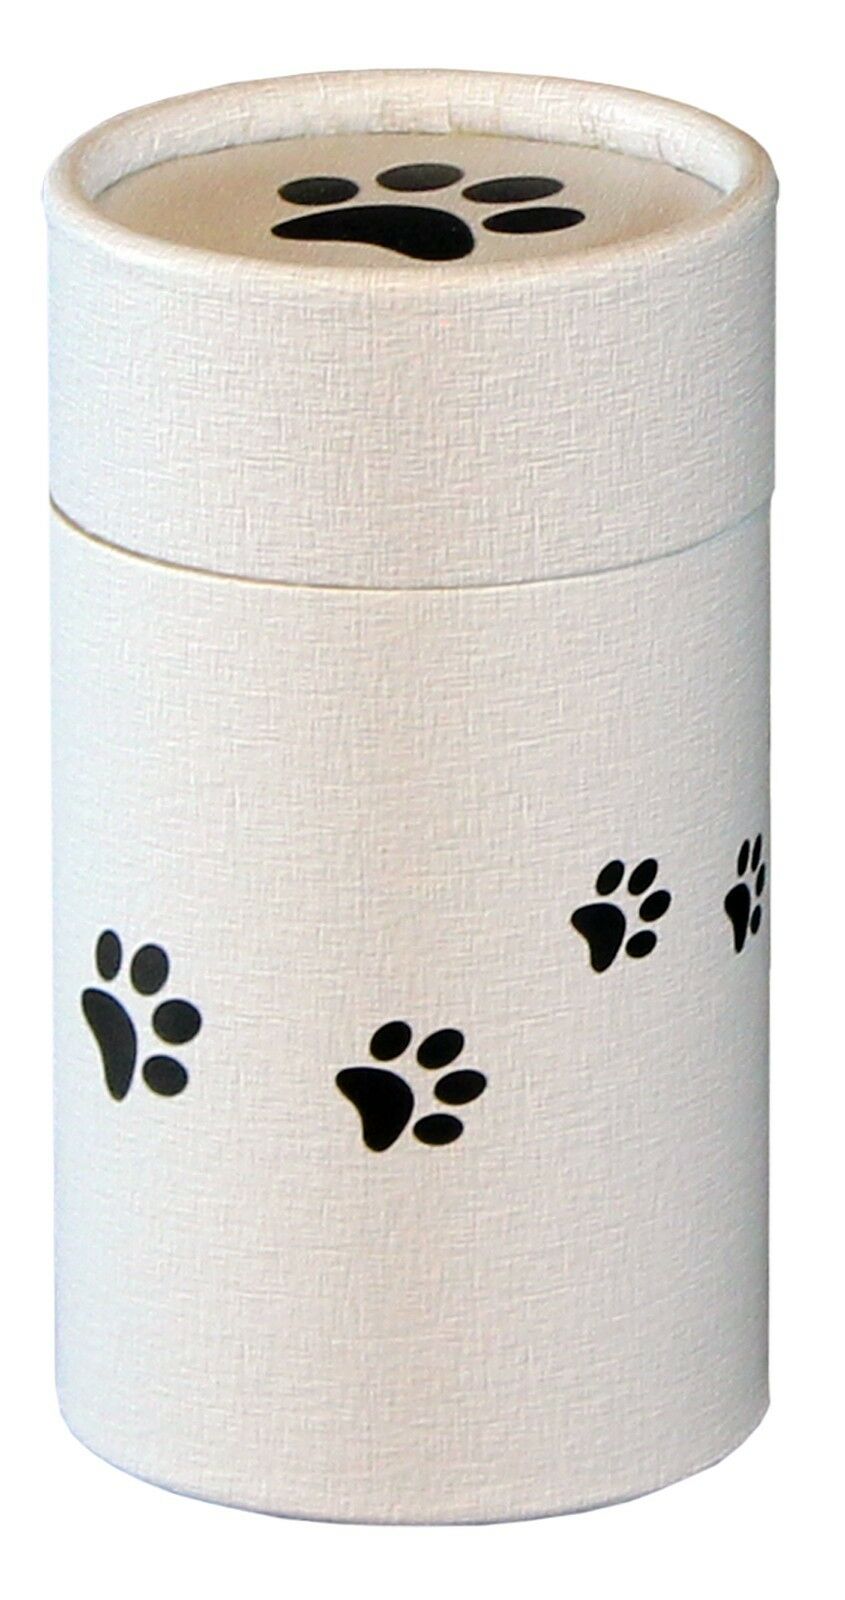 Paws Small 20 Cubic Inches Scattering Tube for Ashes